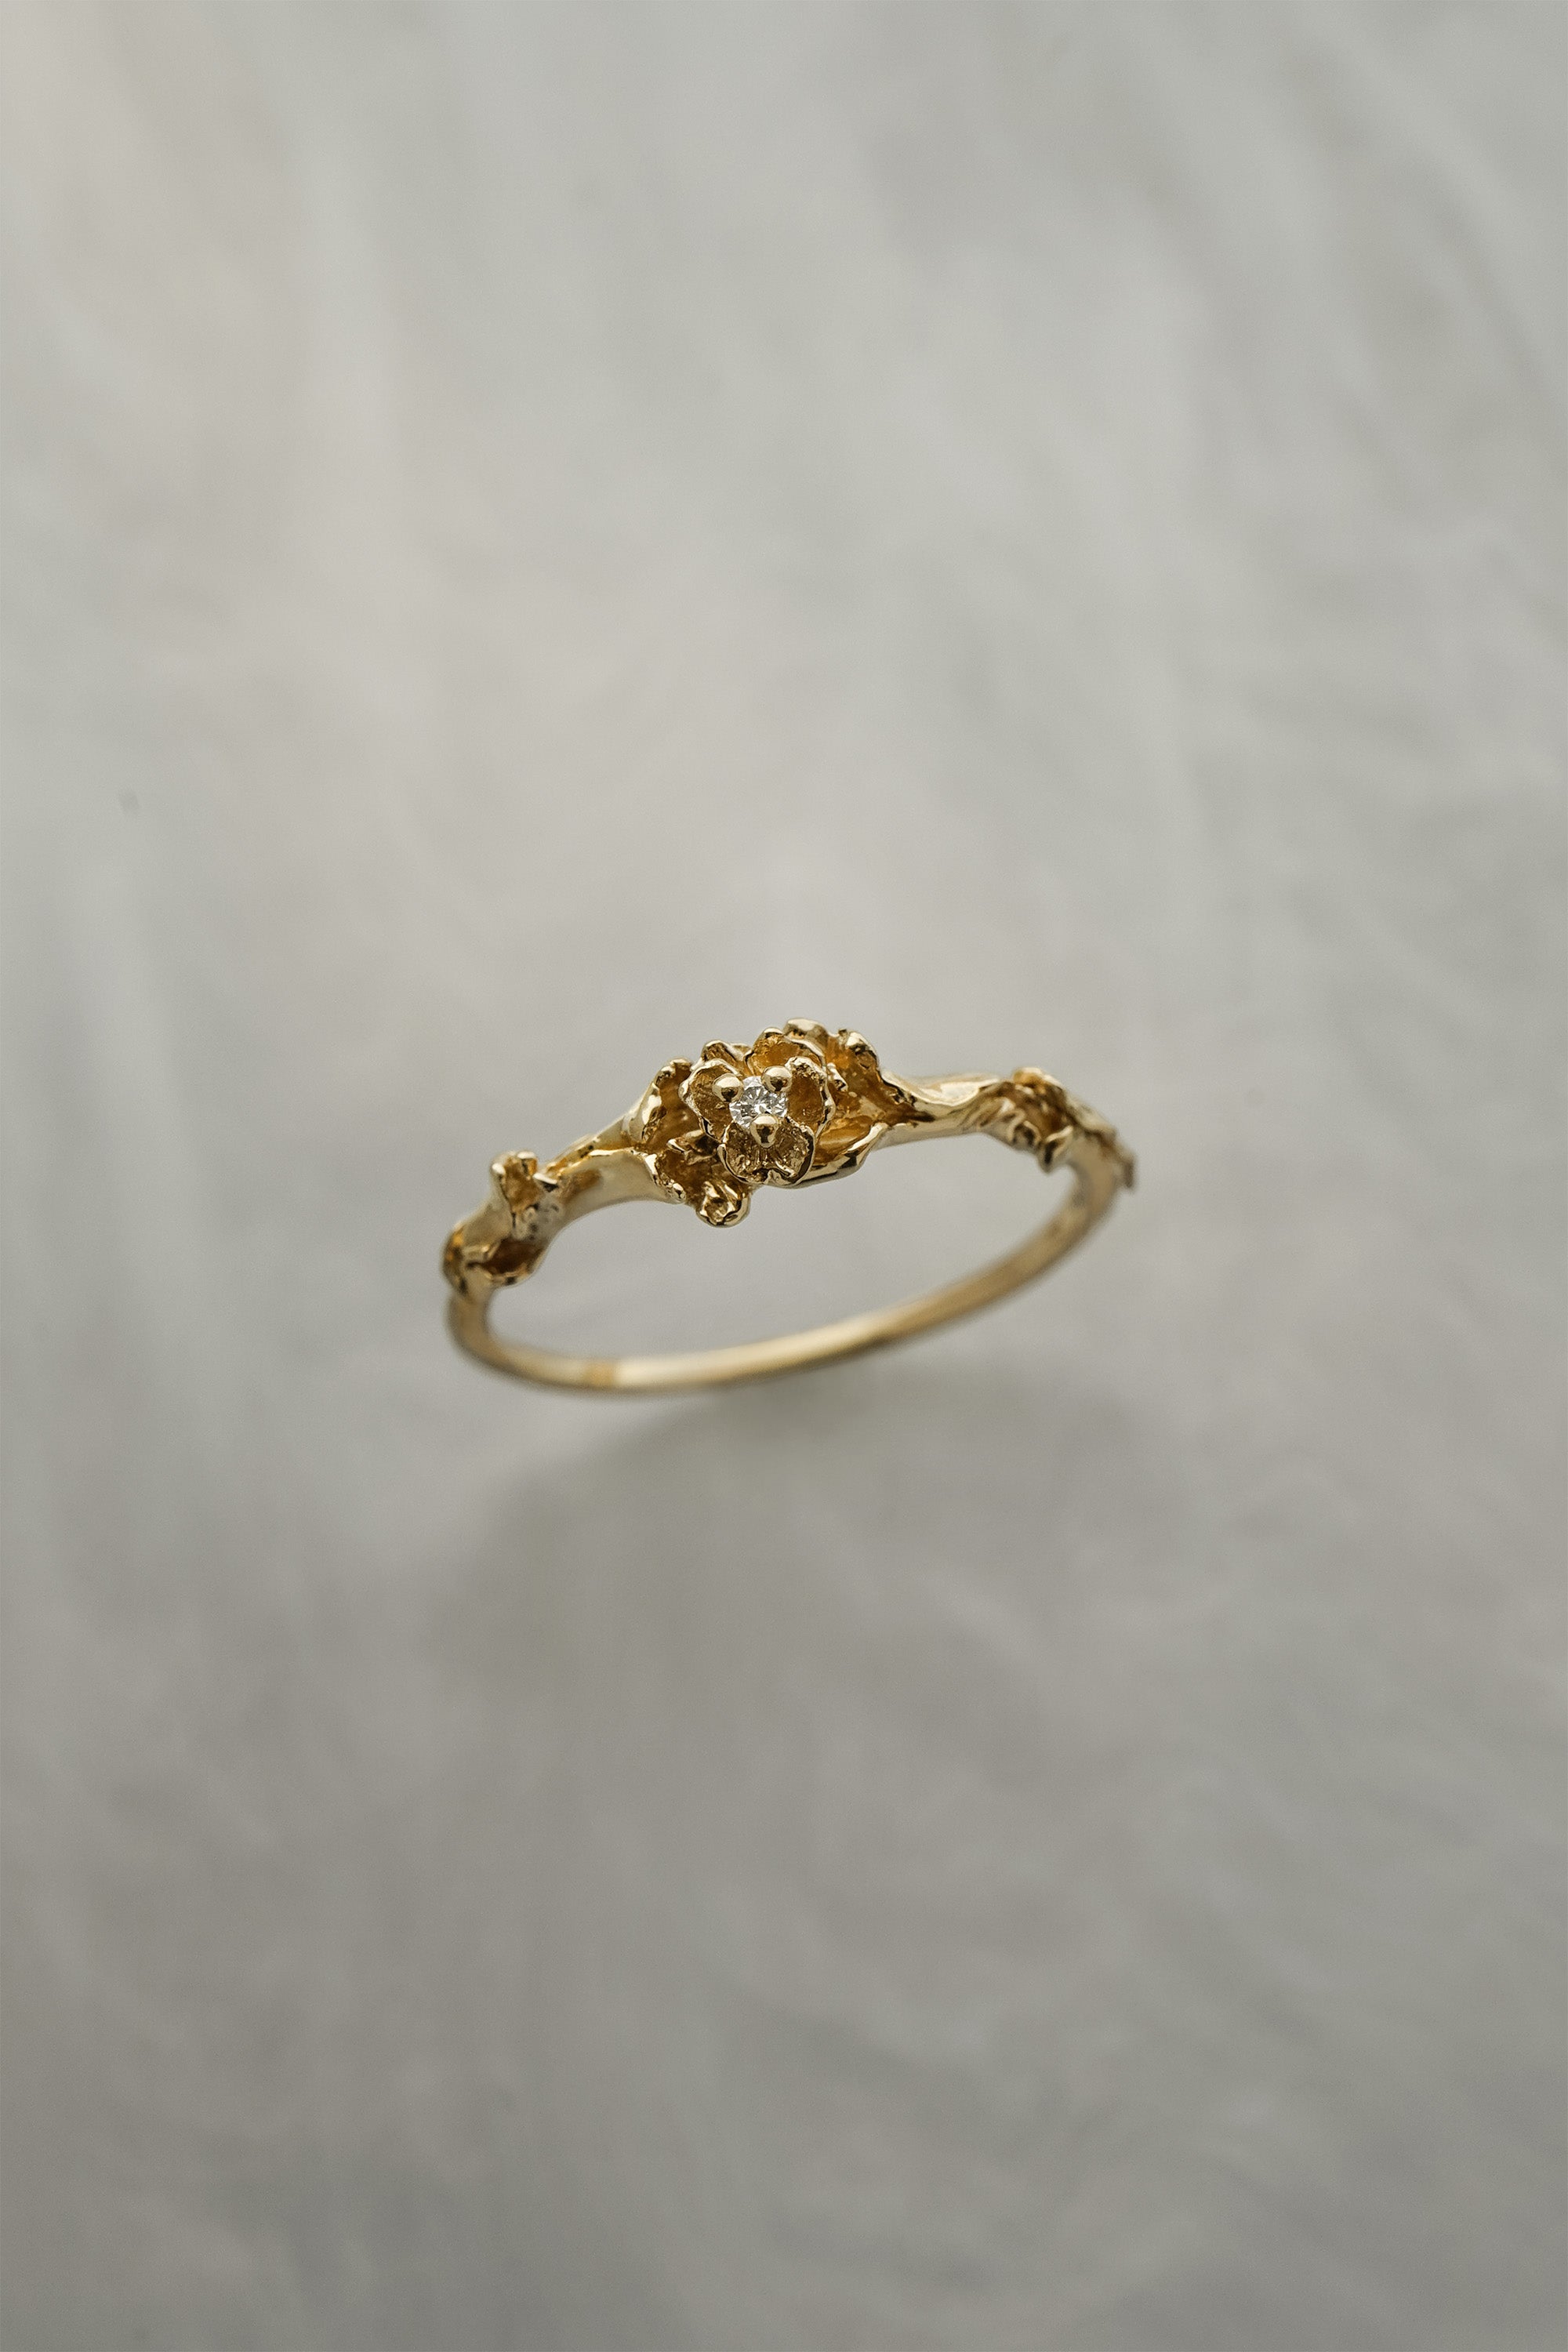 A stock photo of the solid gold "Pansy Signet" ring by Laurie Fleming Jewellery. The ring features hand-carved delicate petals encircling the band, with a tiny pansy flower at the centre, which has a customizable centre stone (pictured with a diamond, available in all birthstones). The ring is against a medium/light grey background.